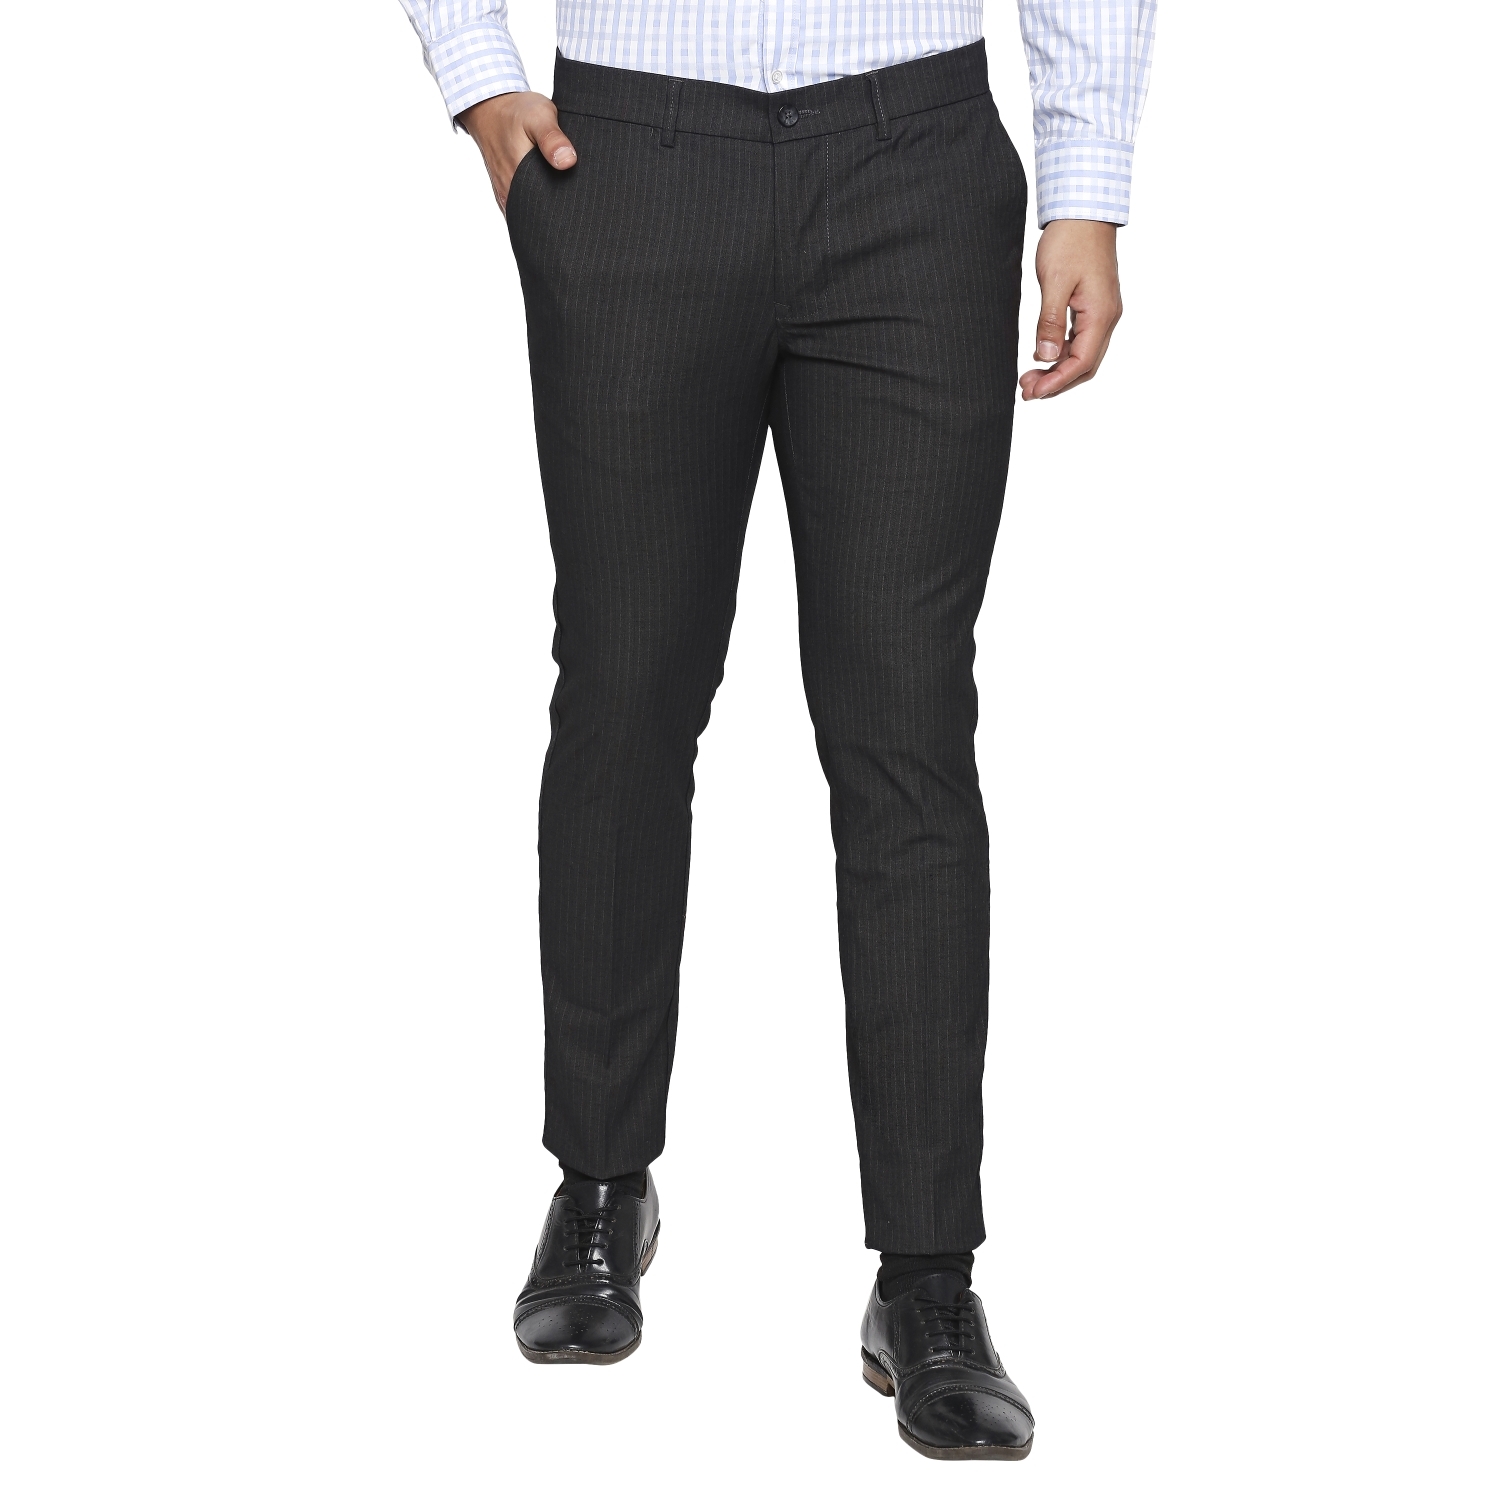 Basics Tapered Fit Shadow Black Stretch Trouser